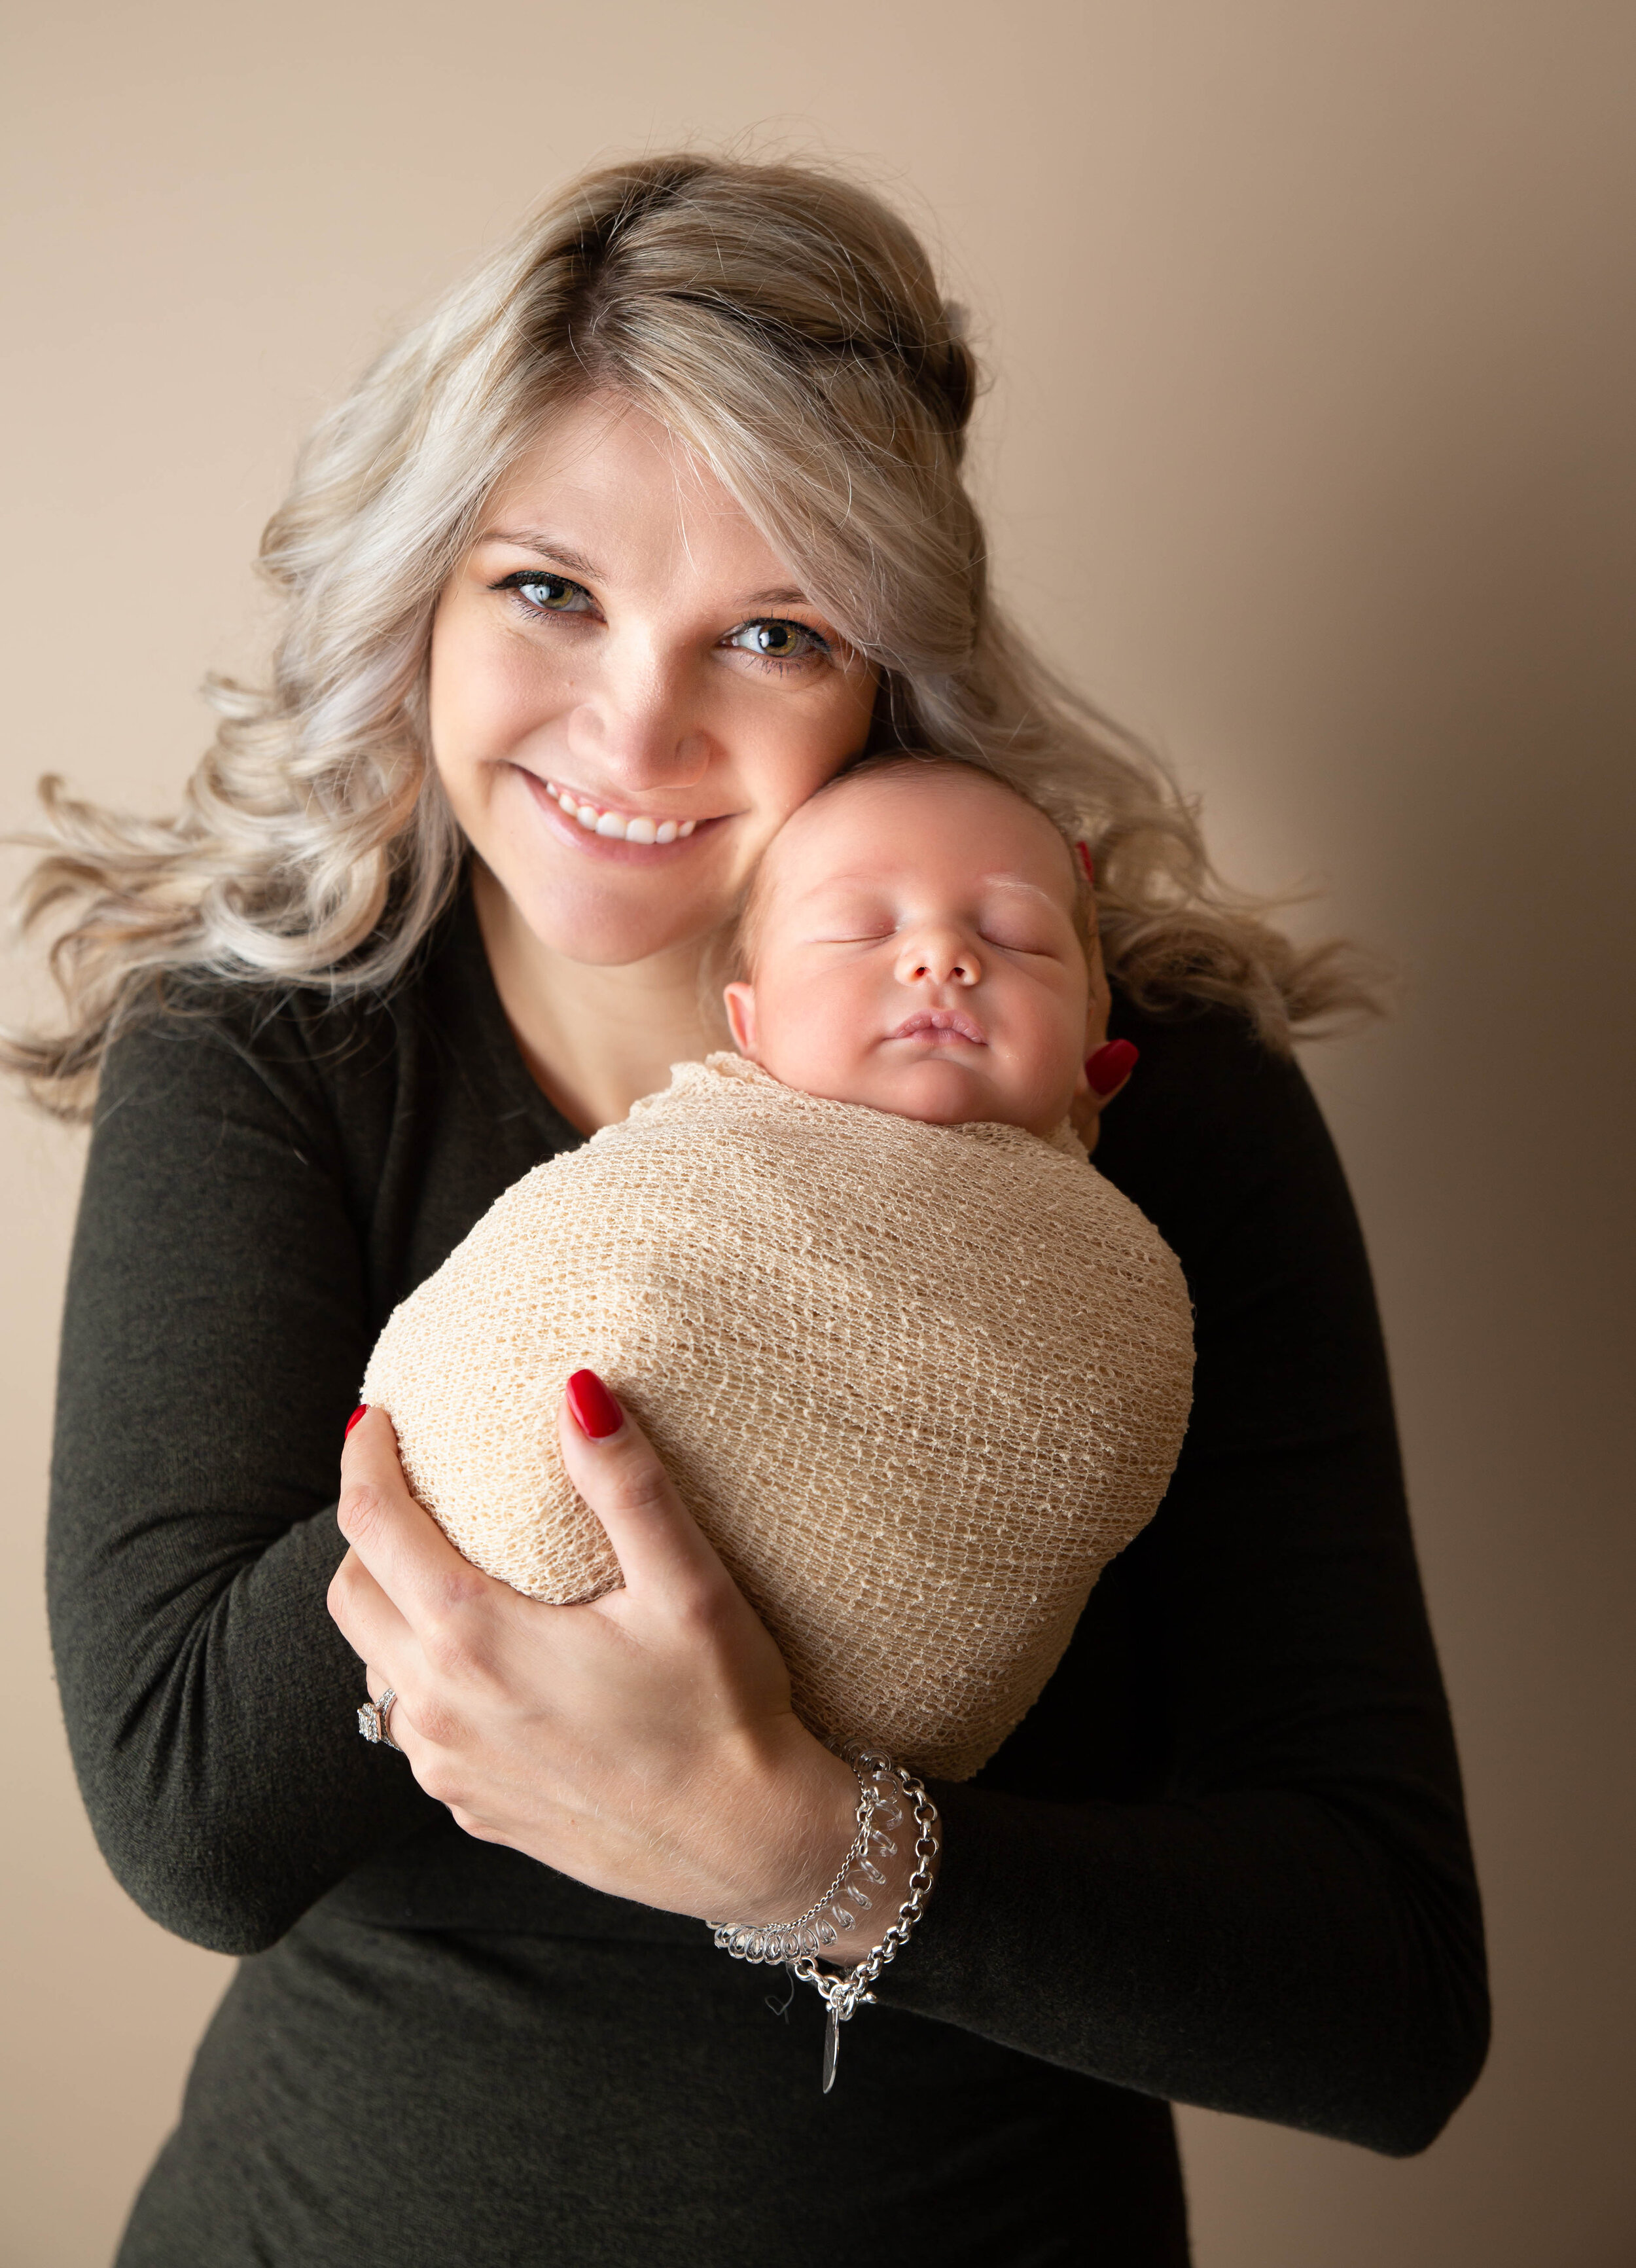 Maternity Newborn Child Family Photography | Lake in the Hills IL